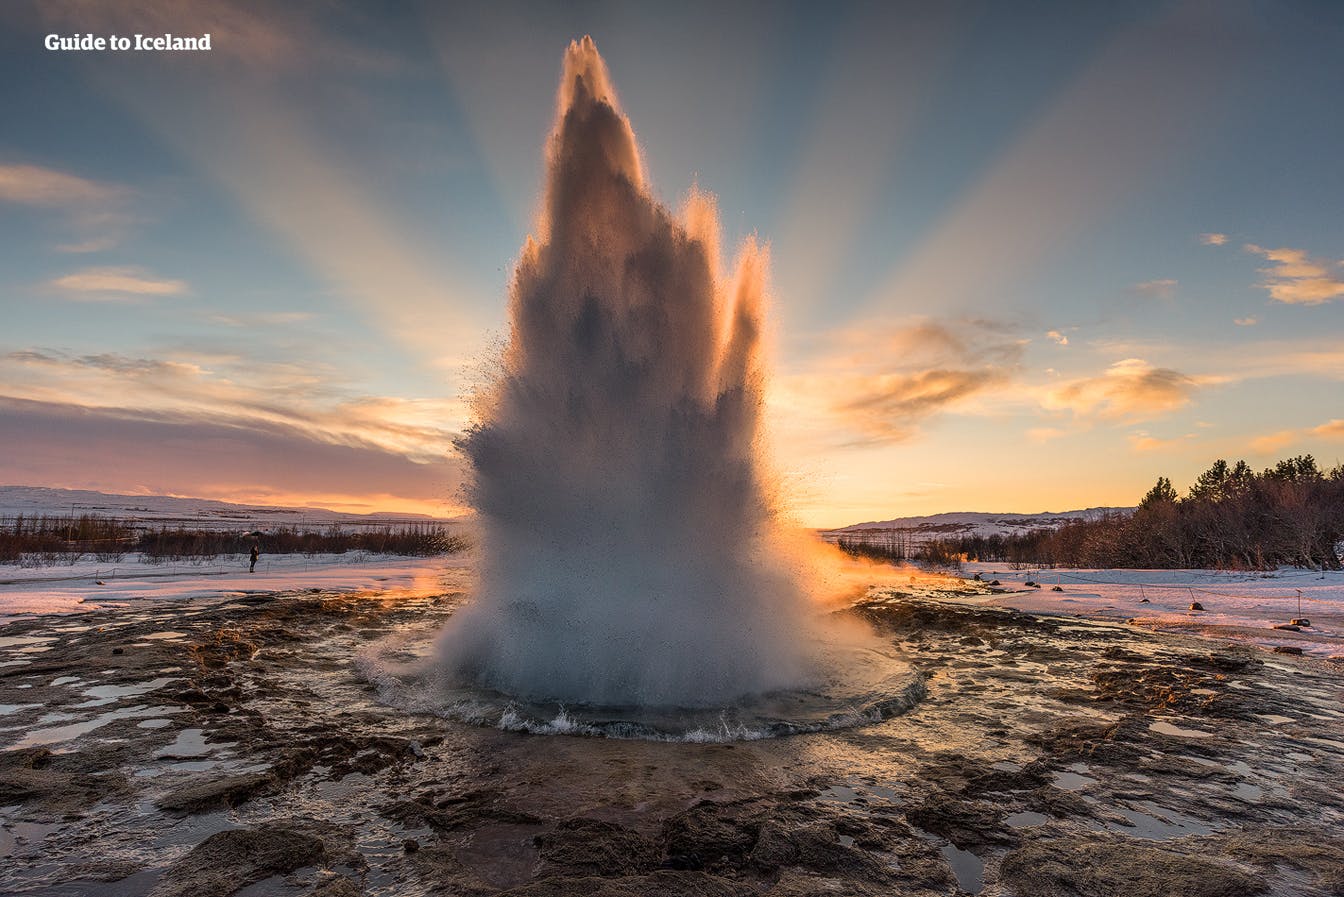 The Golden Circle includes Geysir geothermal area